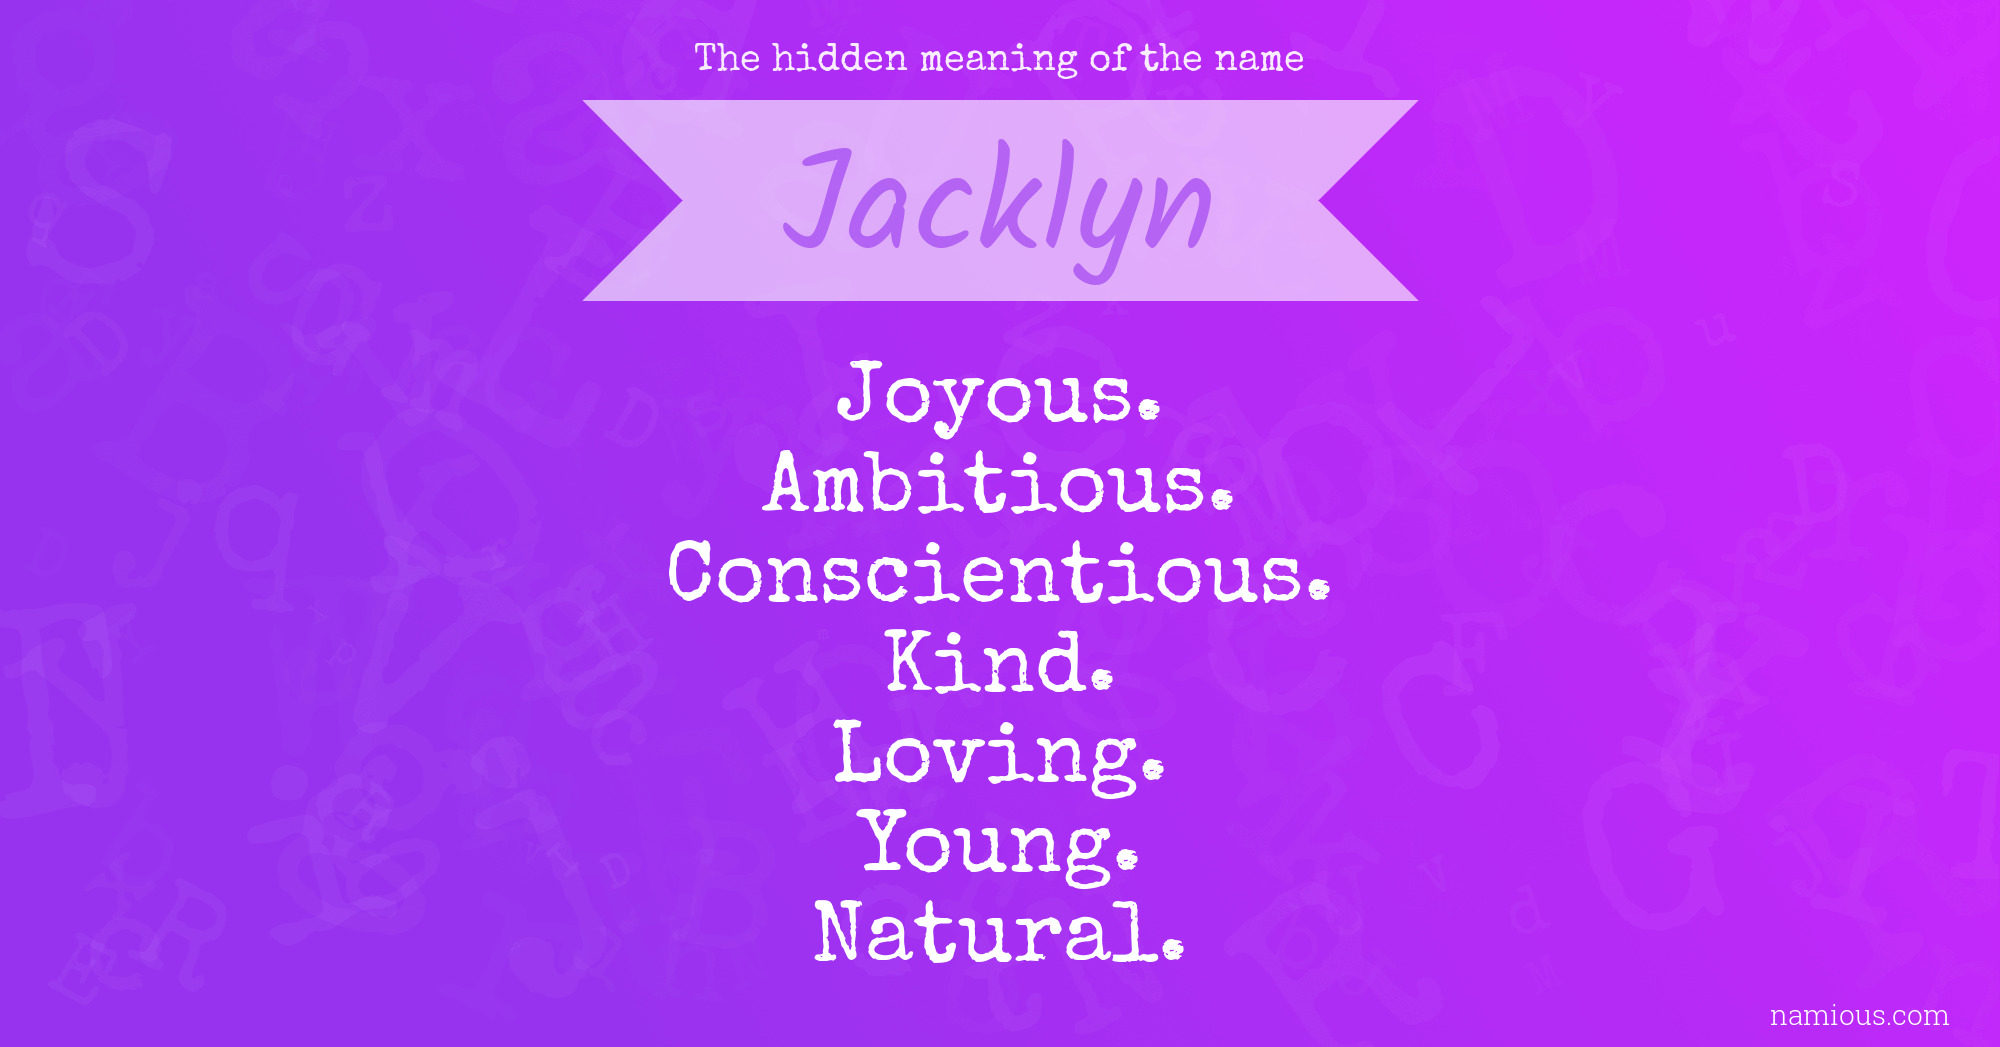 The hidden meaning of the name Jacklyn